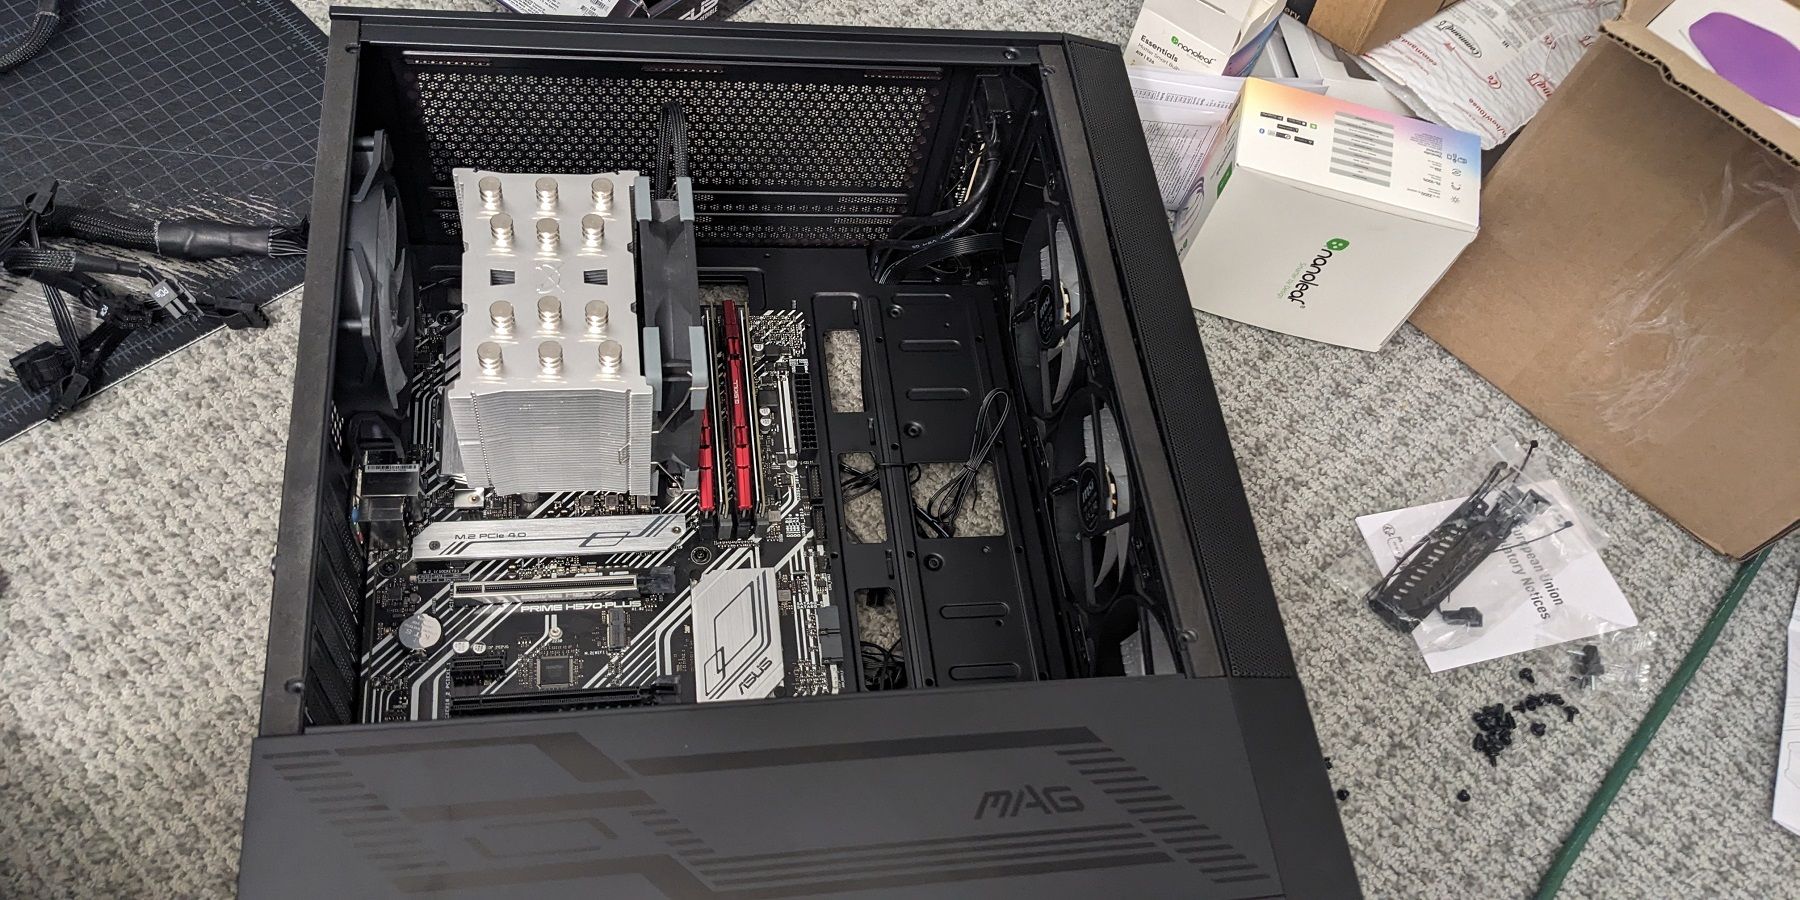 MSI Mag Forge 112R Motherboard Installation